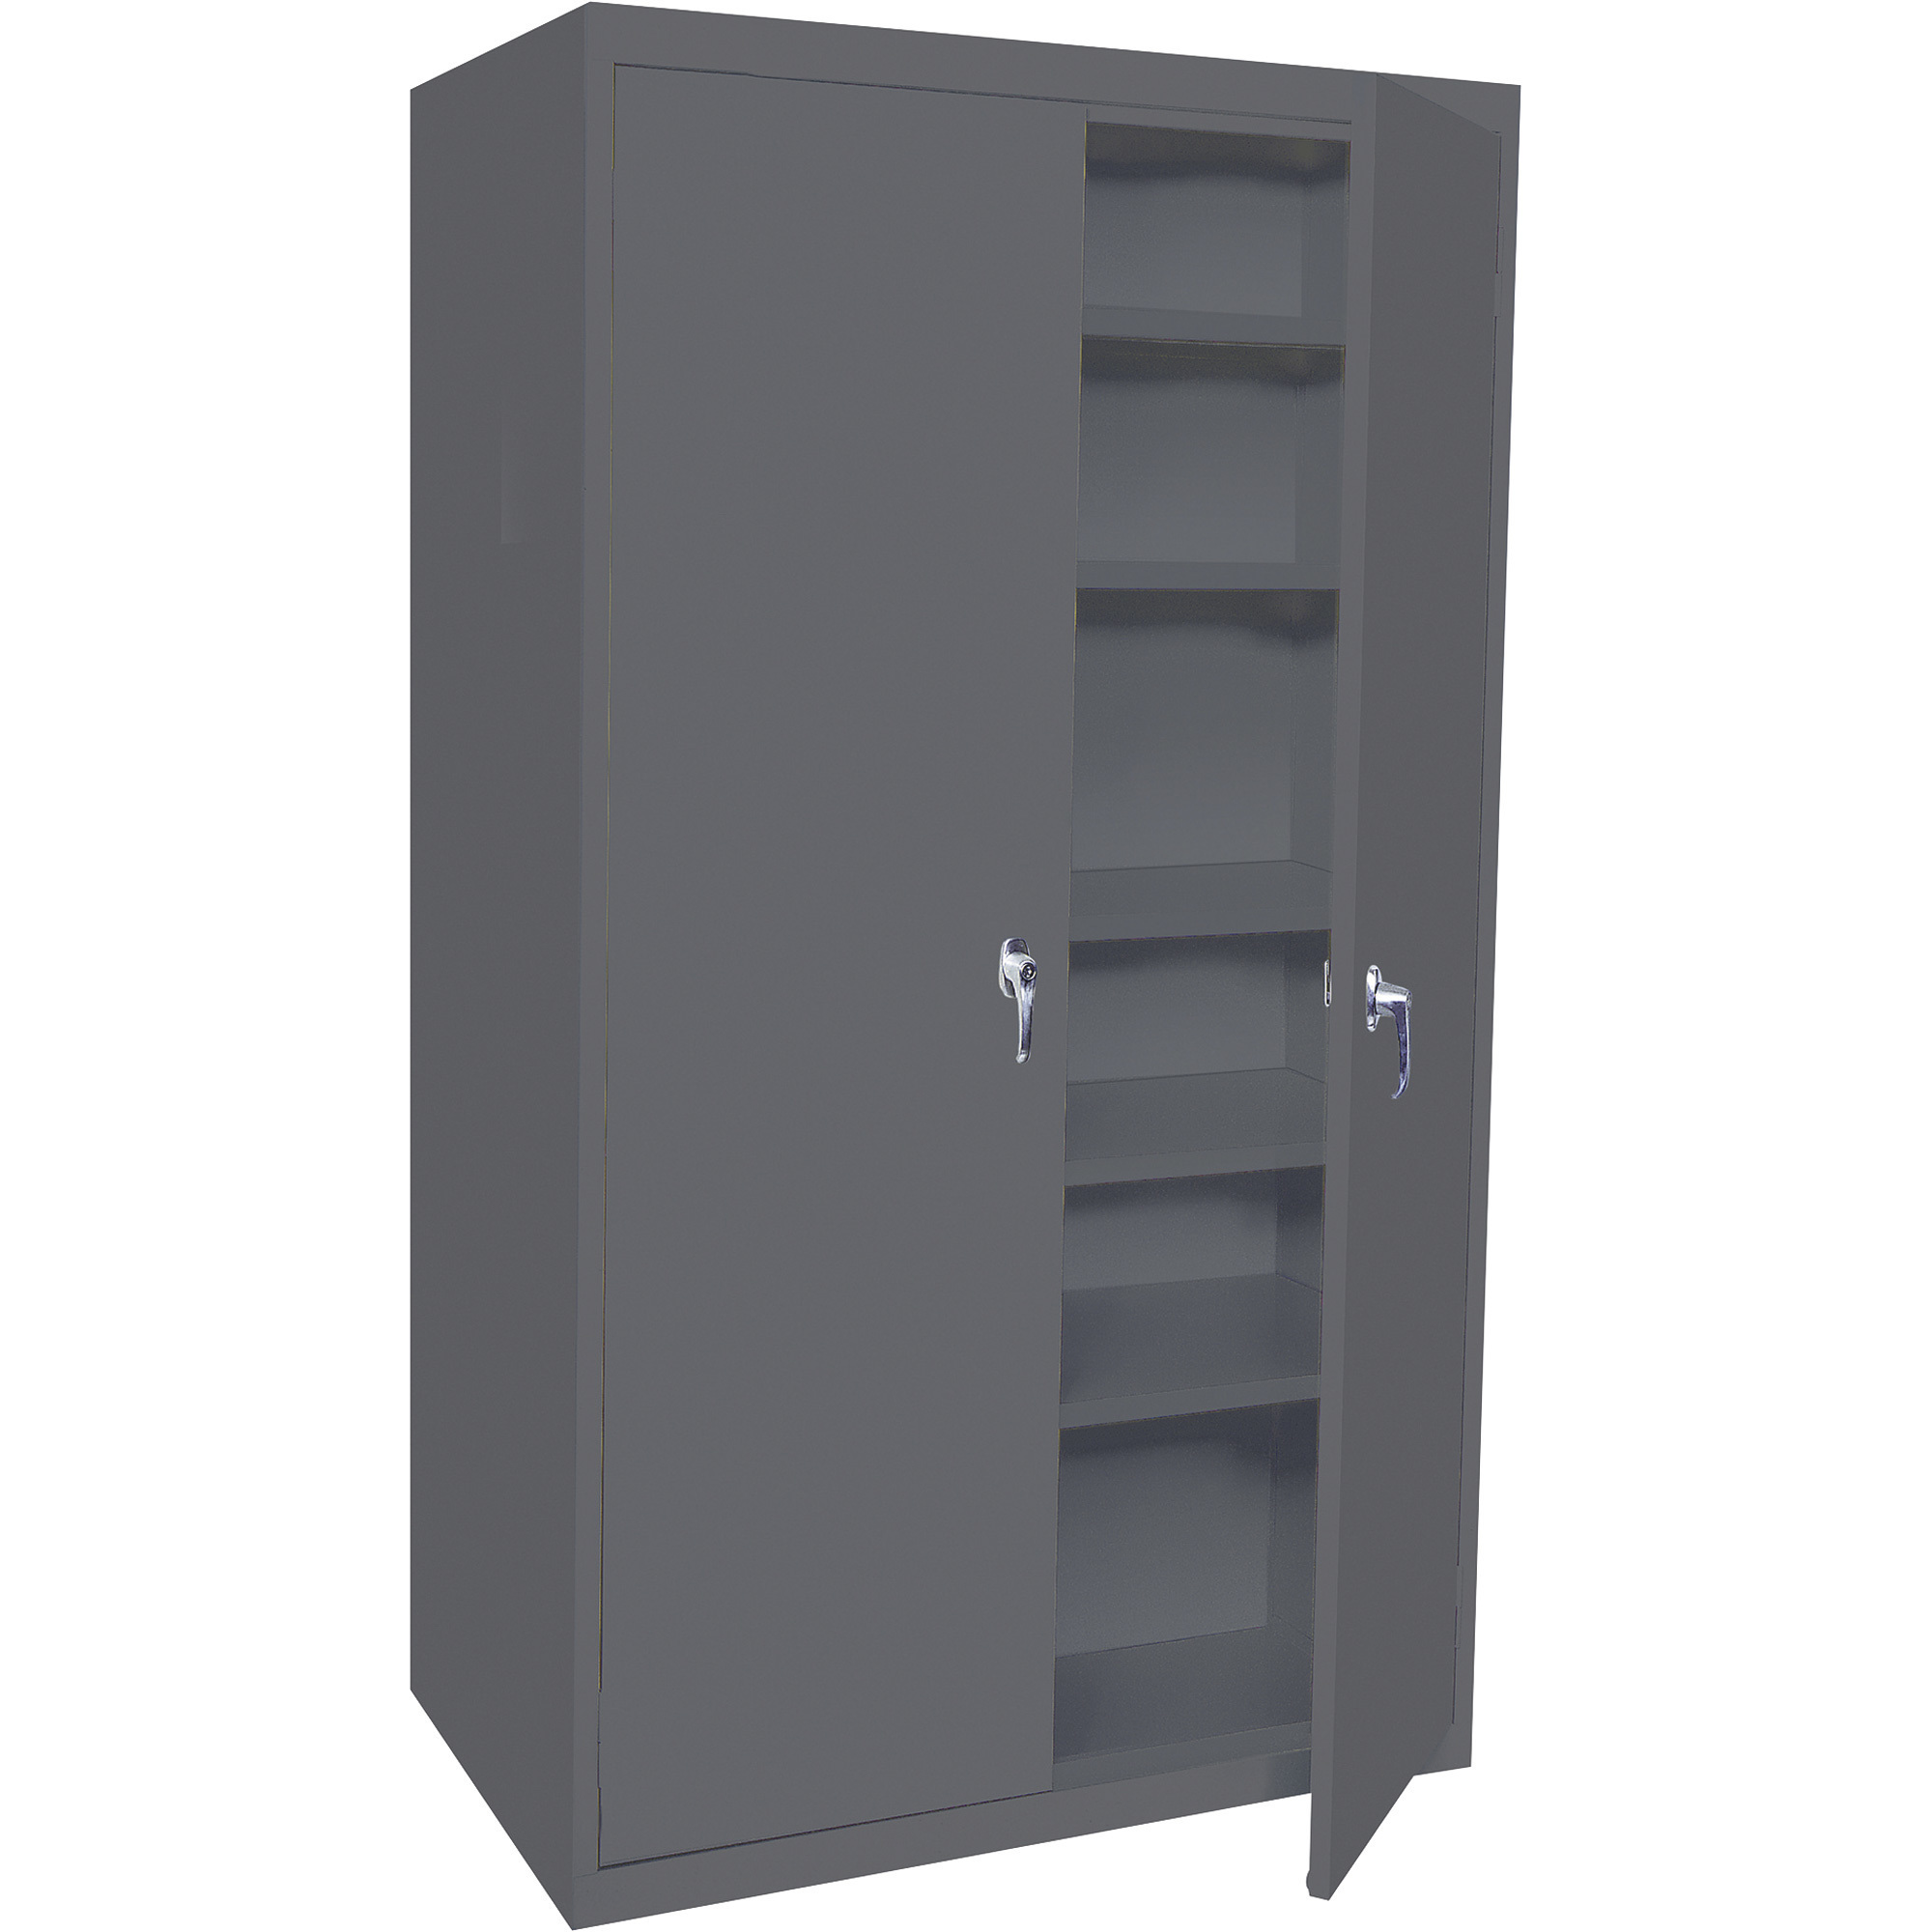 Storage Cabinet — Charcoal, 3 Adjustable Shelves/2 Fixed Shelves, 36Inch W x 18Inch D x 78Inch H, Model - Steel Cabinets USA 5-7818-AF-CHAR